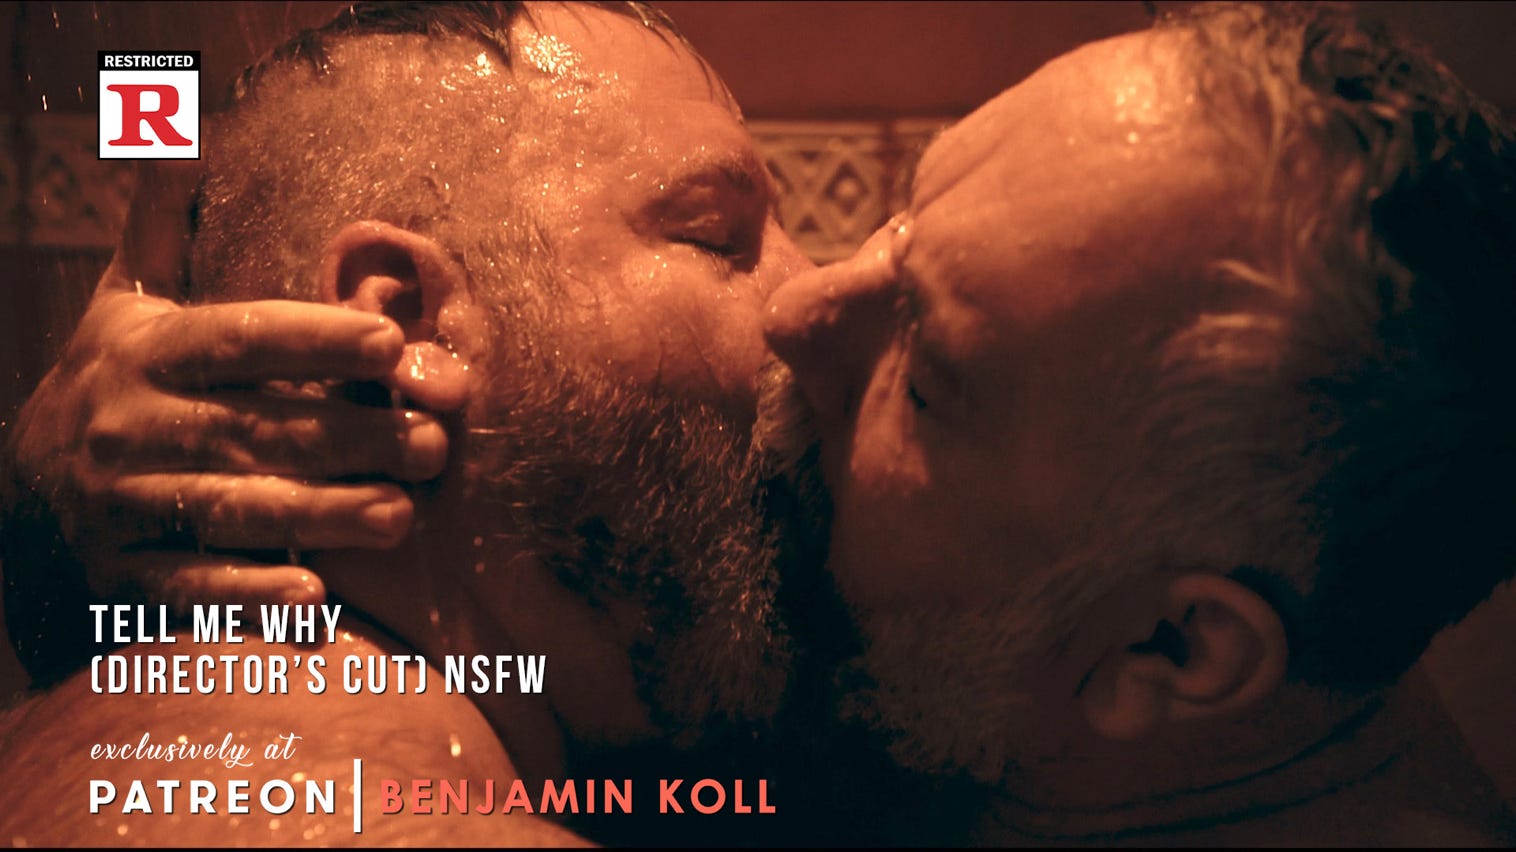 Benjamin Koll & Jeremy Morse - Tell Me Why (R rated Director's Cut) - Patreon Exclusive